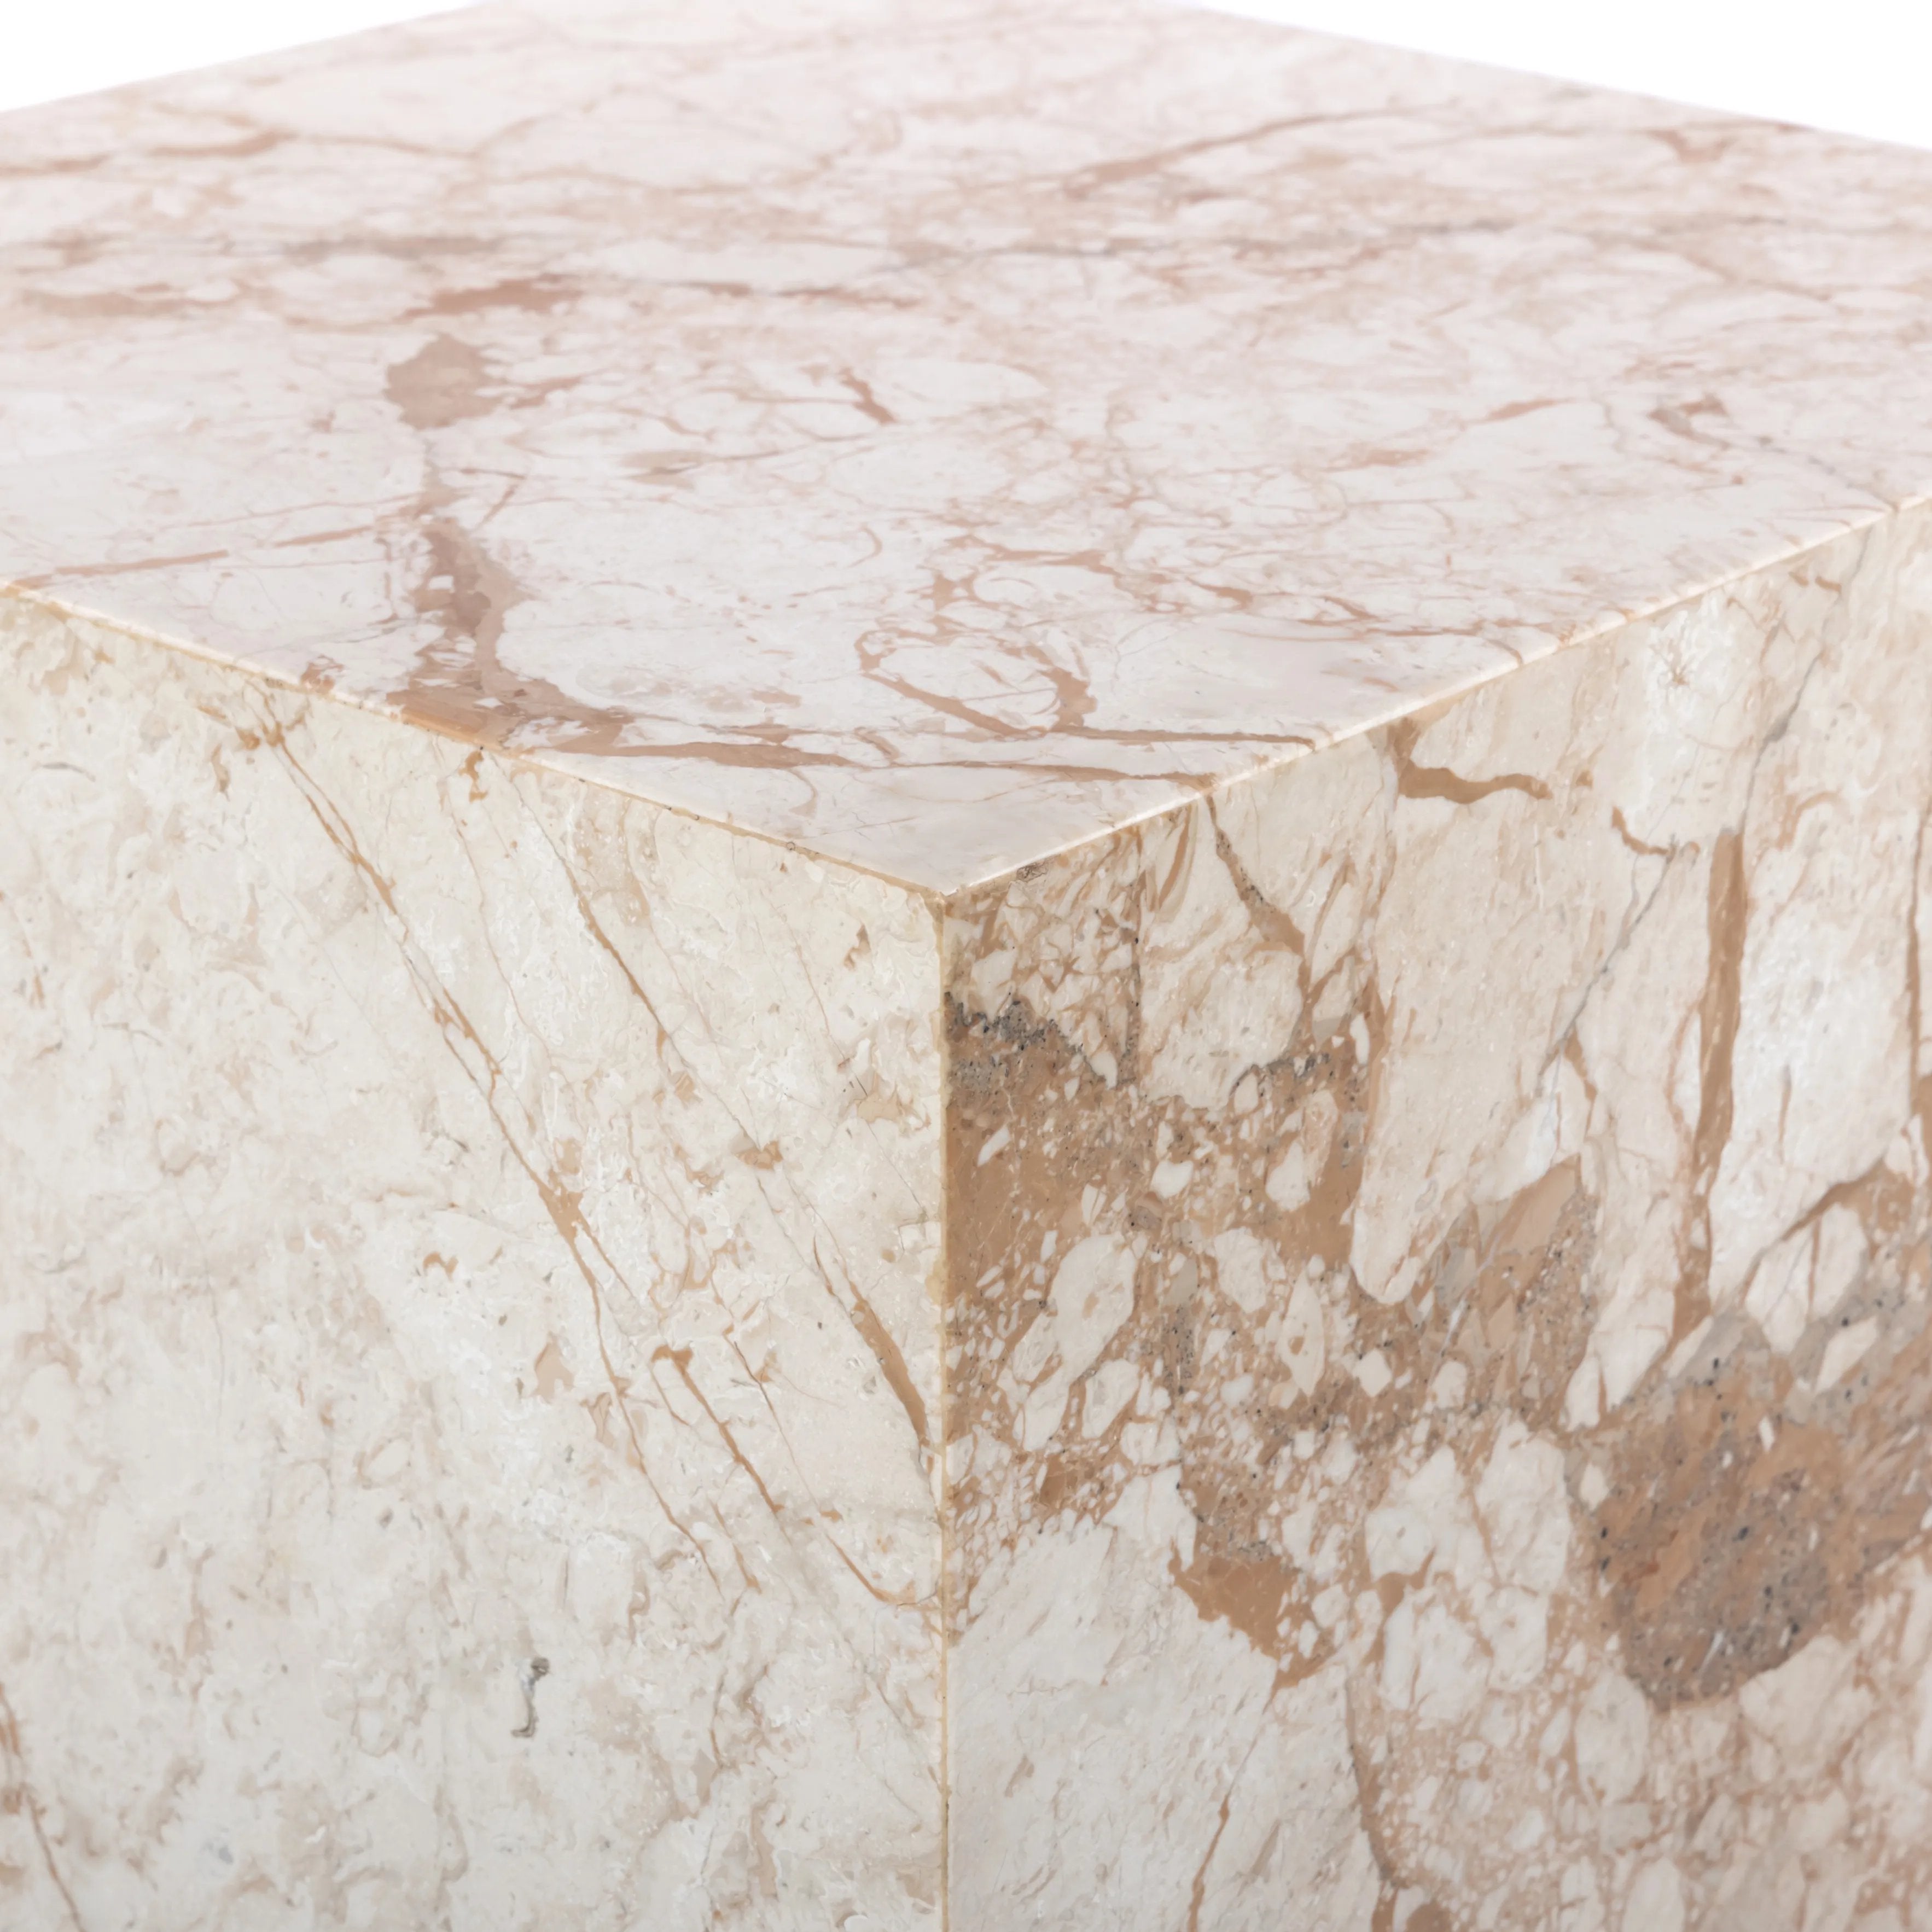 Taupe marble shapes a cubed, plinth-style end table that can be styled just about anywhere.Collection: Elemen Amethyst Home provides interior design, new home construction design consulting, vintage area rugs, and lighting in the San Diego metro area.